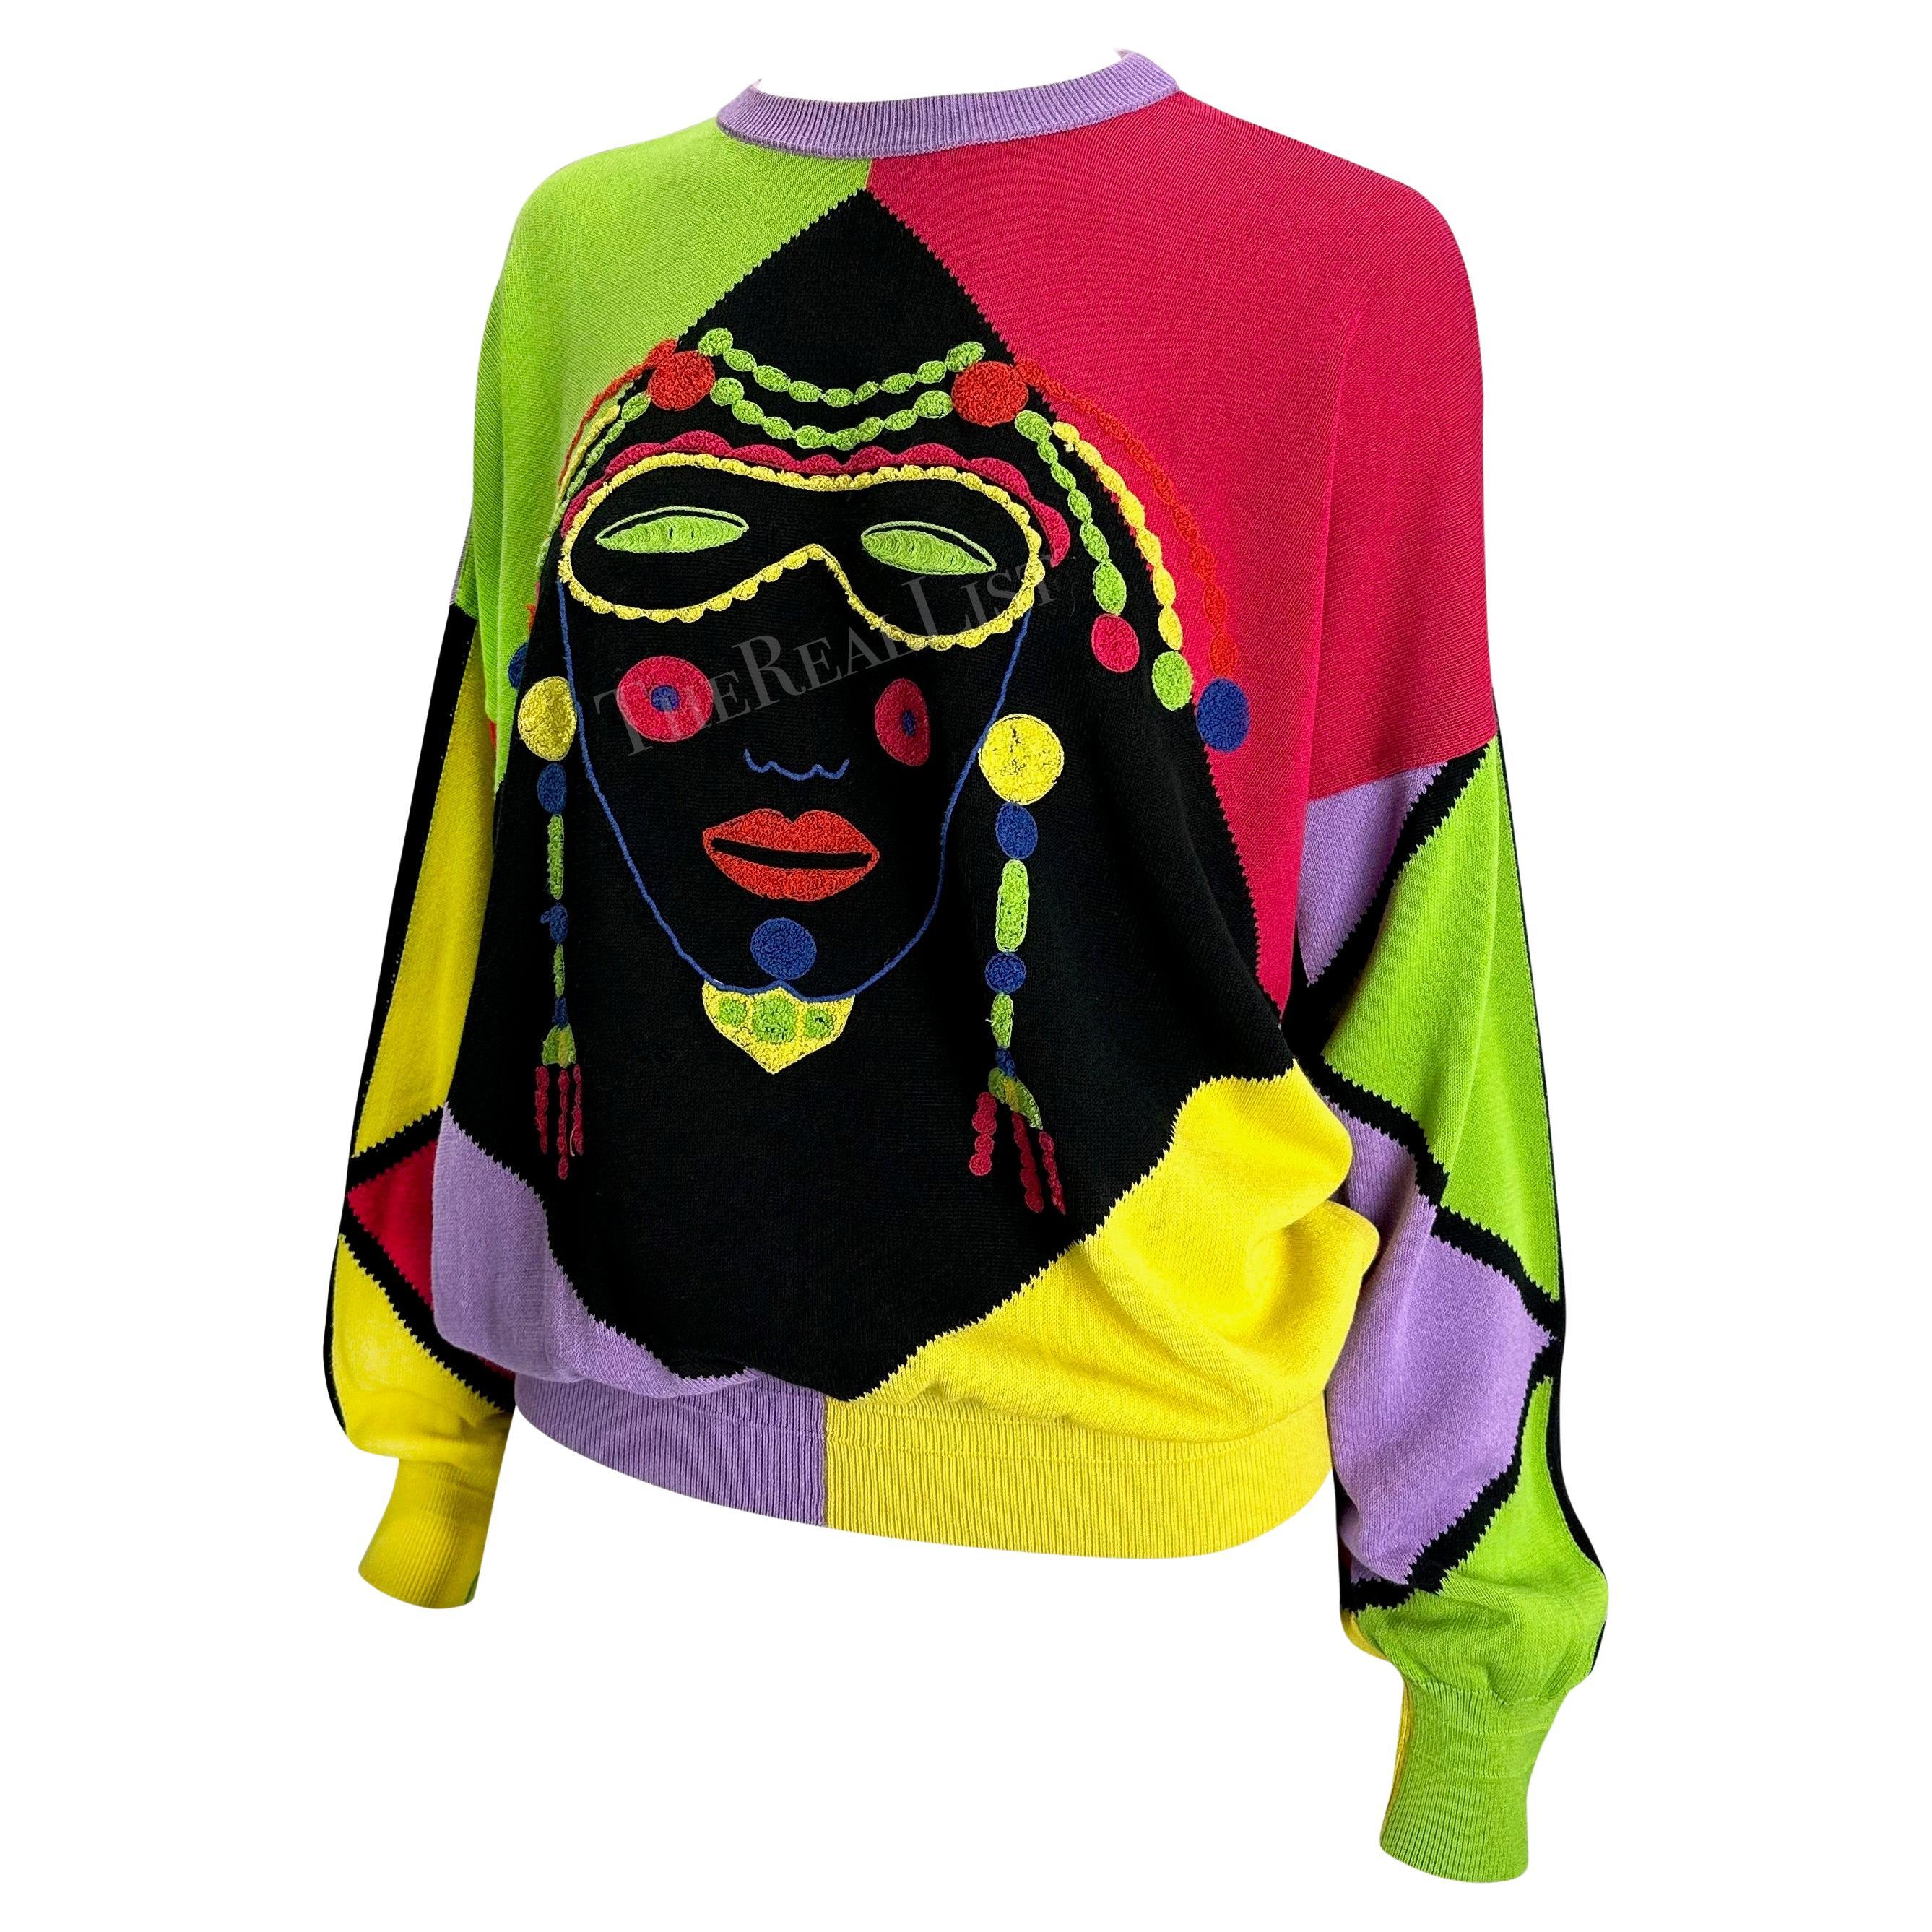 Presenting a multicolor Gianni Versace embroidered sweater, designed by Gianni Versace. From 1990, this oversized sweater features a color block pattern with a harlequin face embroidered on the front.

Approximate measurements:
Size - 48IT
Shoulder